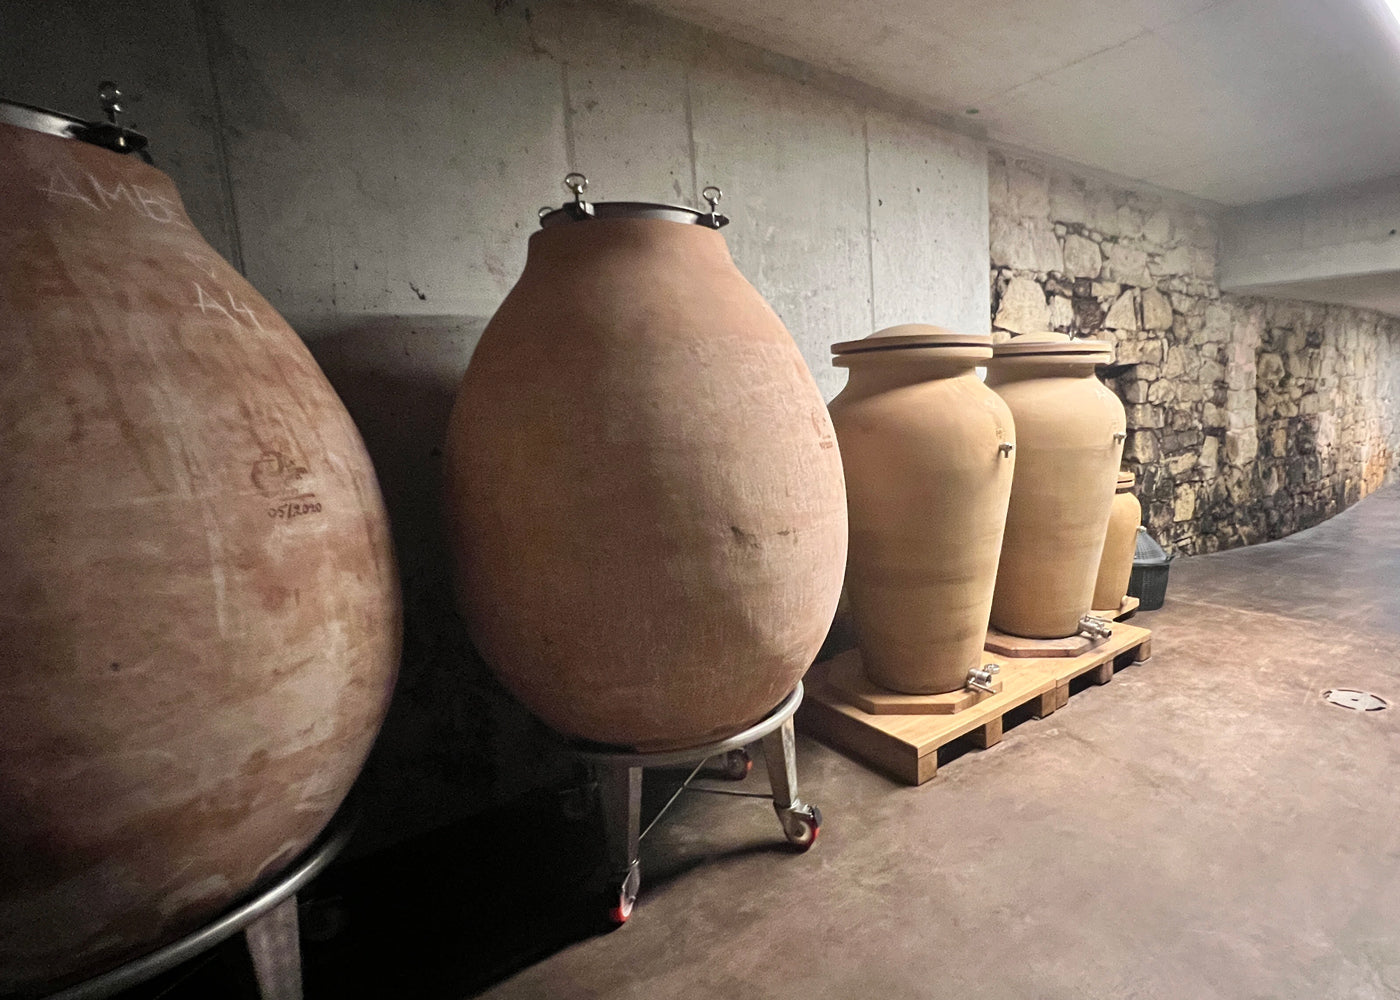 Clay Vessels